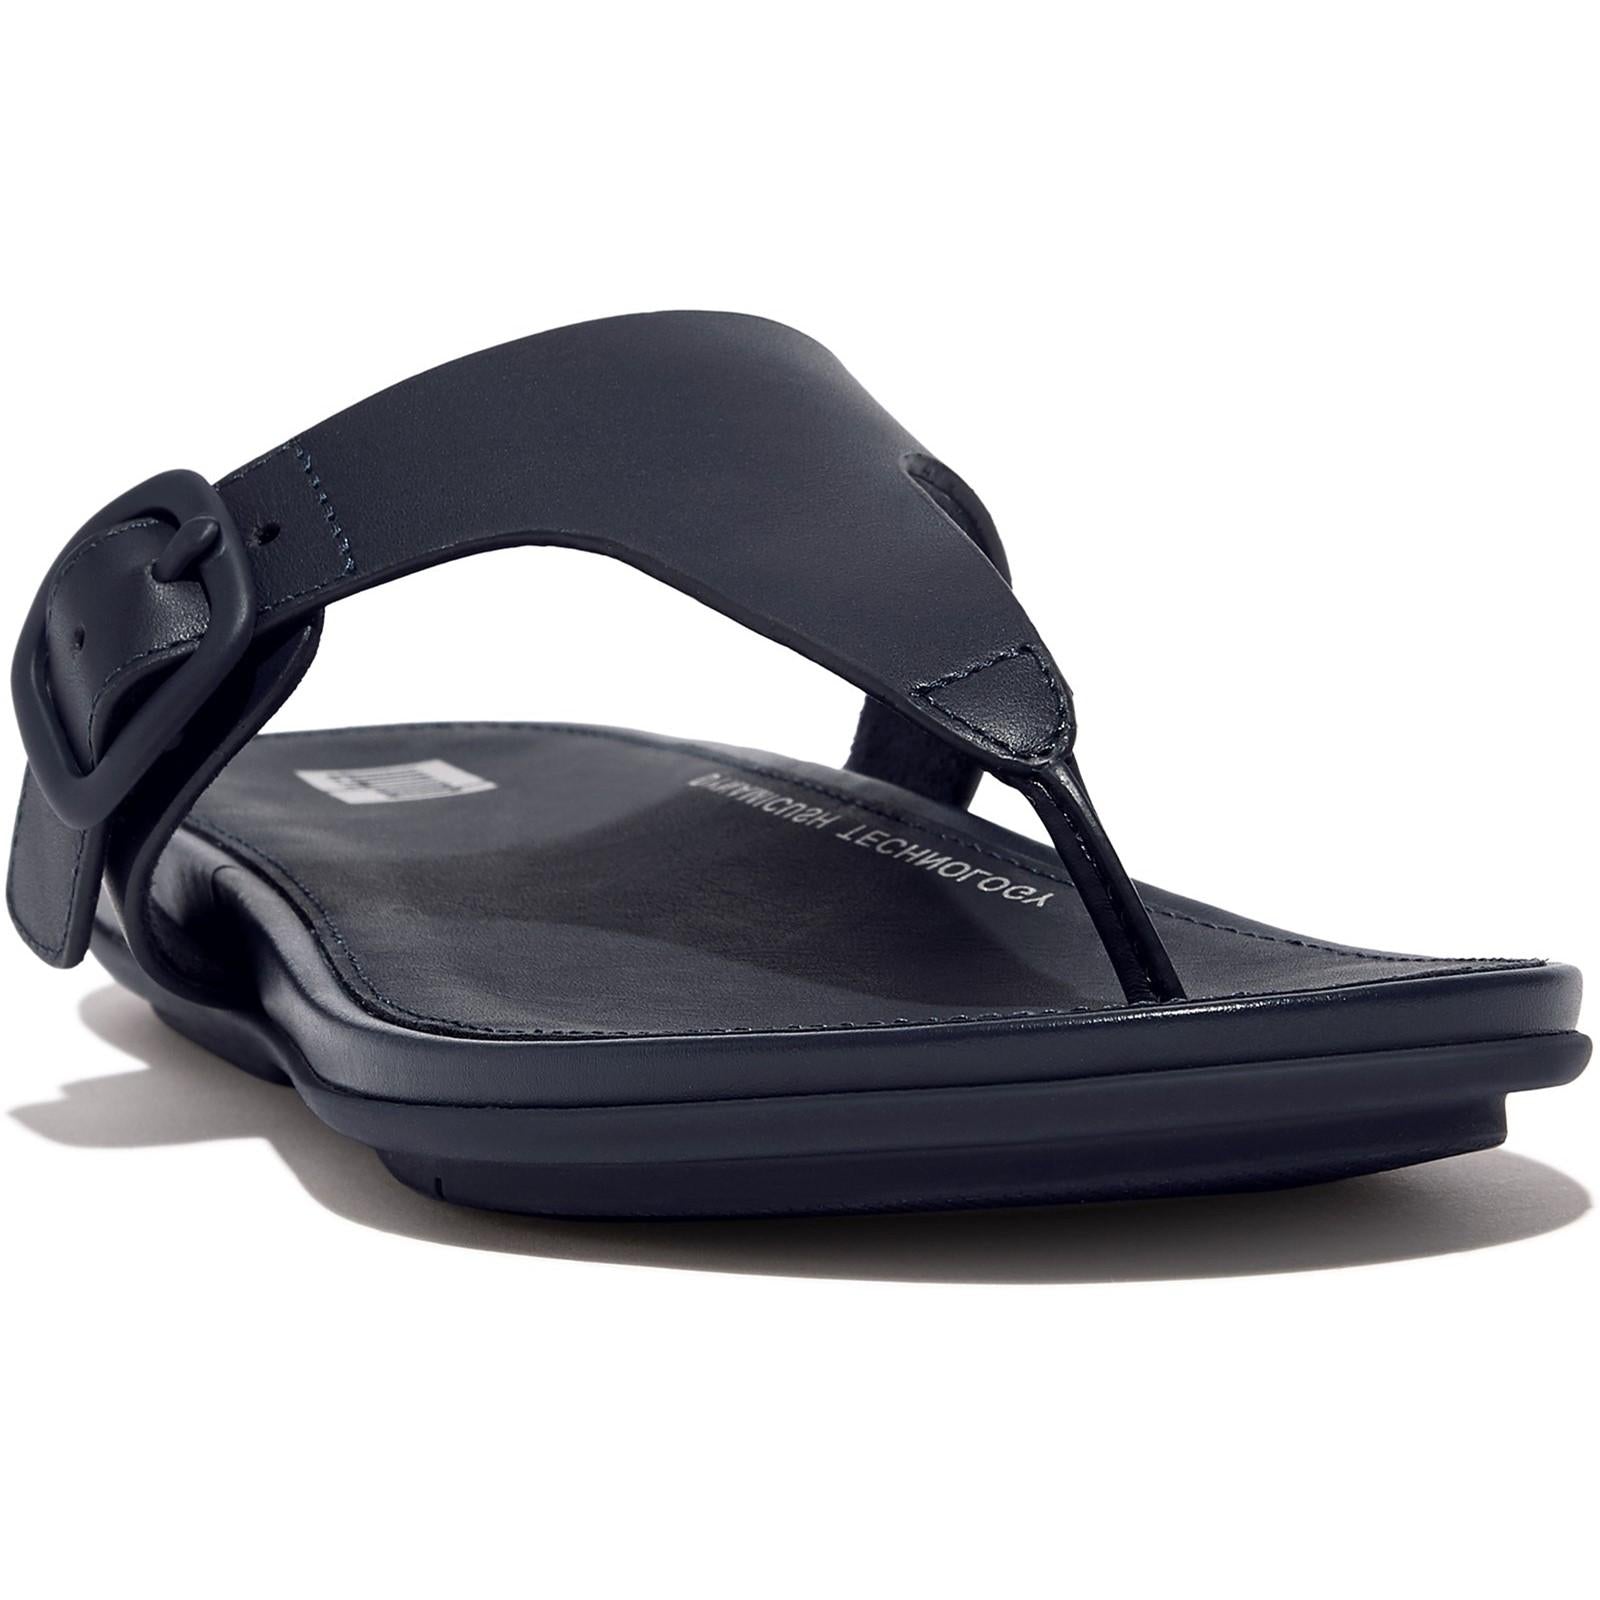 Fitflop Gracie Toe-Post Sandals